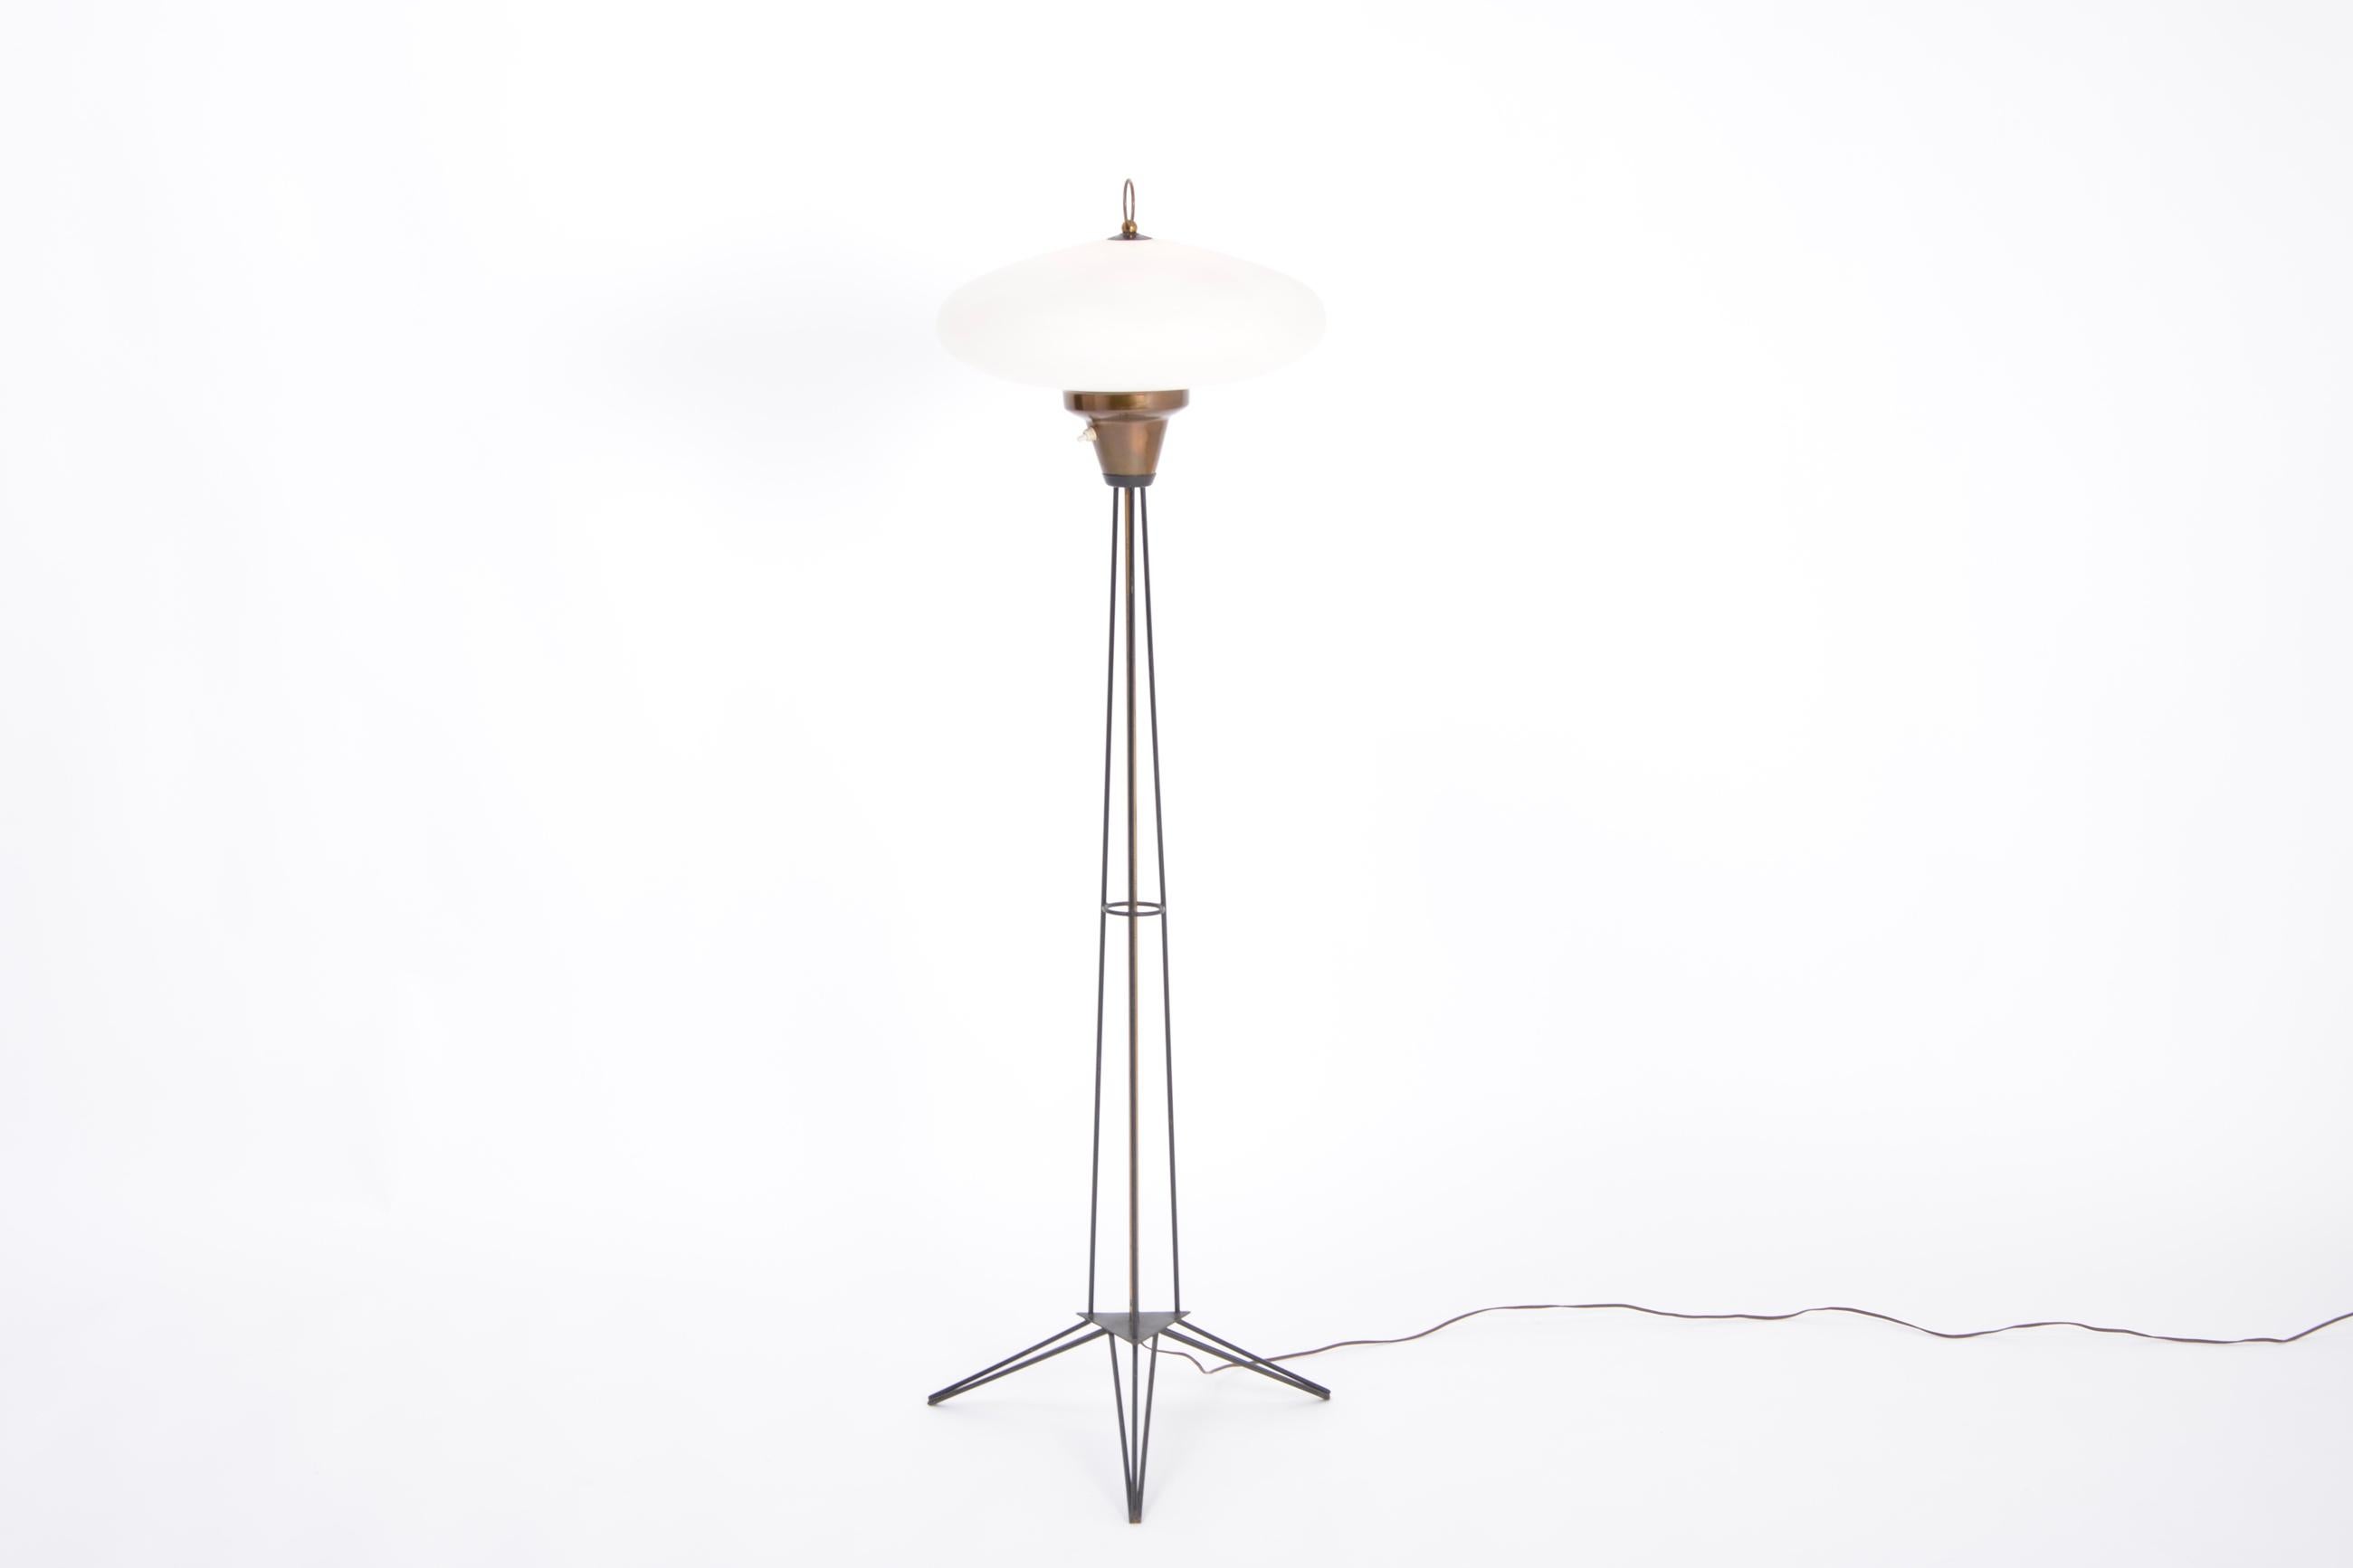 Elegant Italian midcentury opaline glass and iron floor lamp
Gorgeous Italian floor lamp on tripod legs made in brass, black varnished metal and opaline glass very similar to a Stilnovo design.
It is a vintage piece, therefore it might show slight